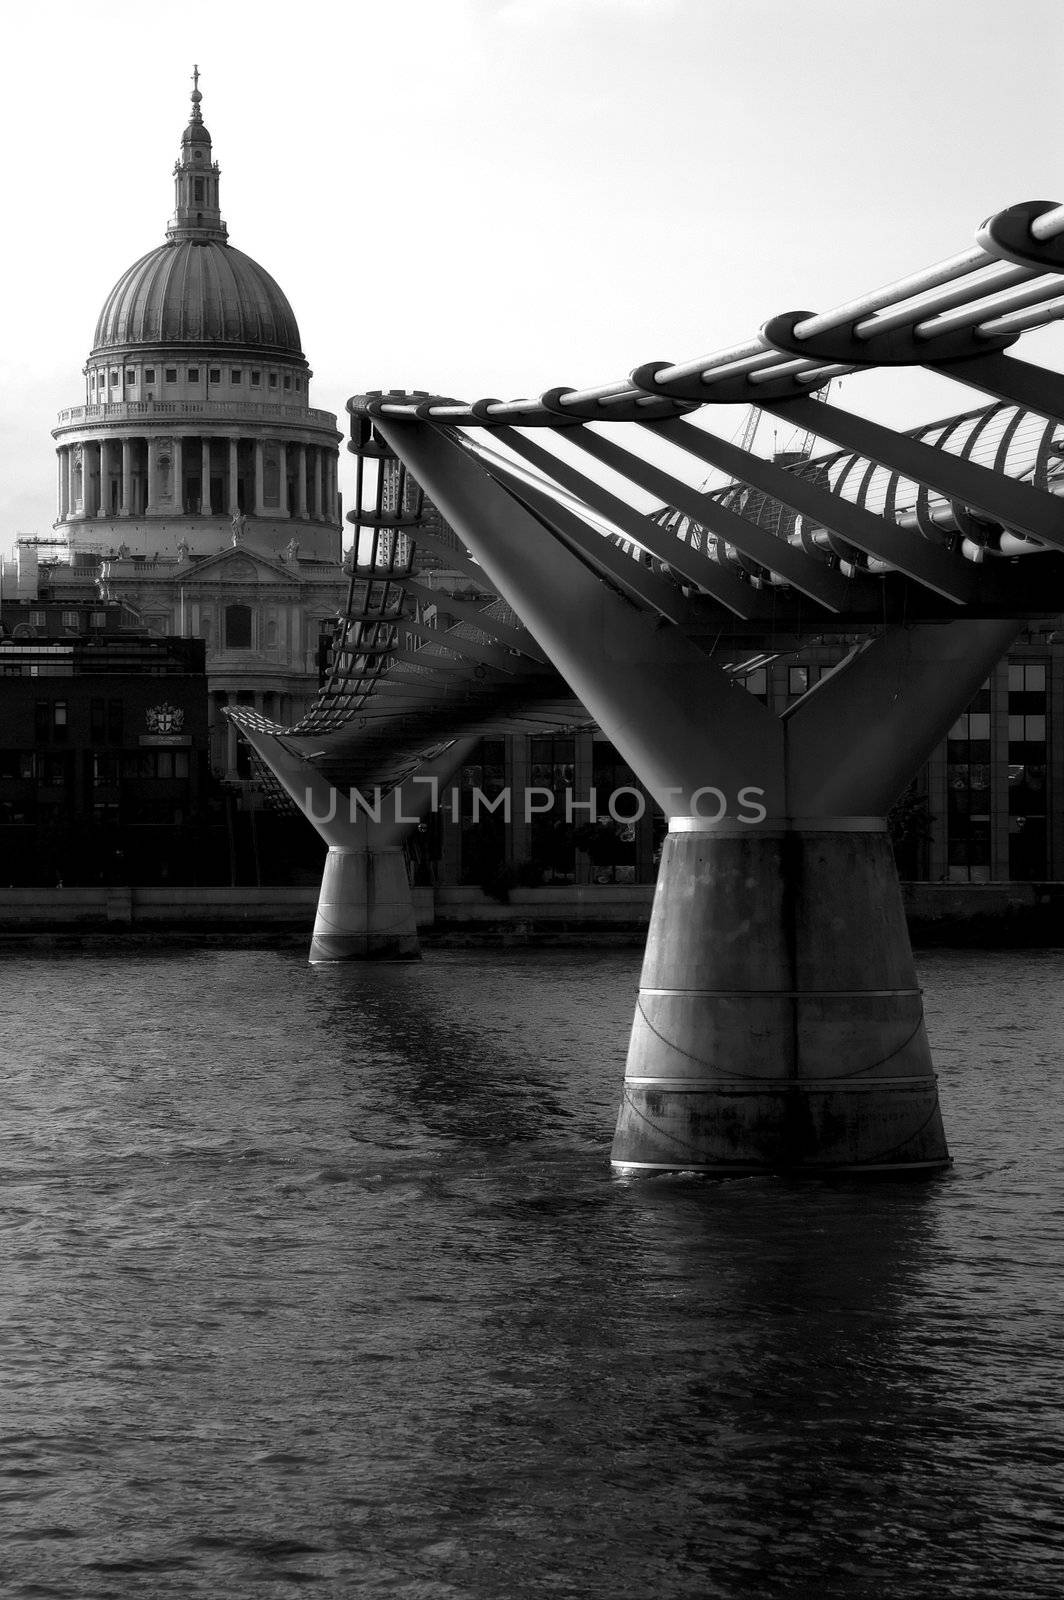 St Pauls Cathedral and Millennium Bridge over the River Thames.